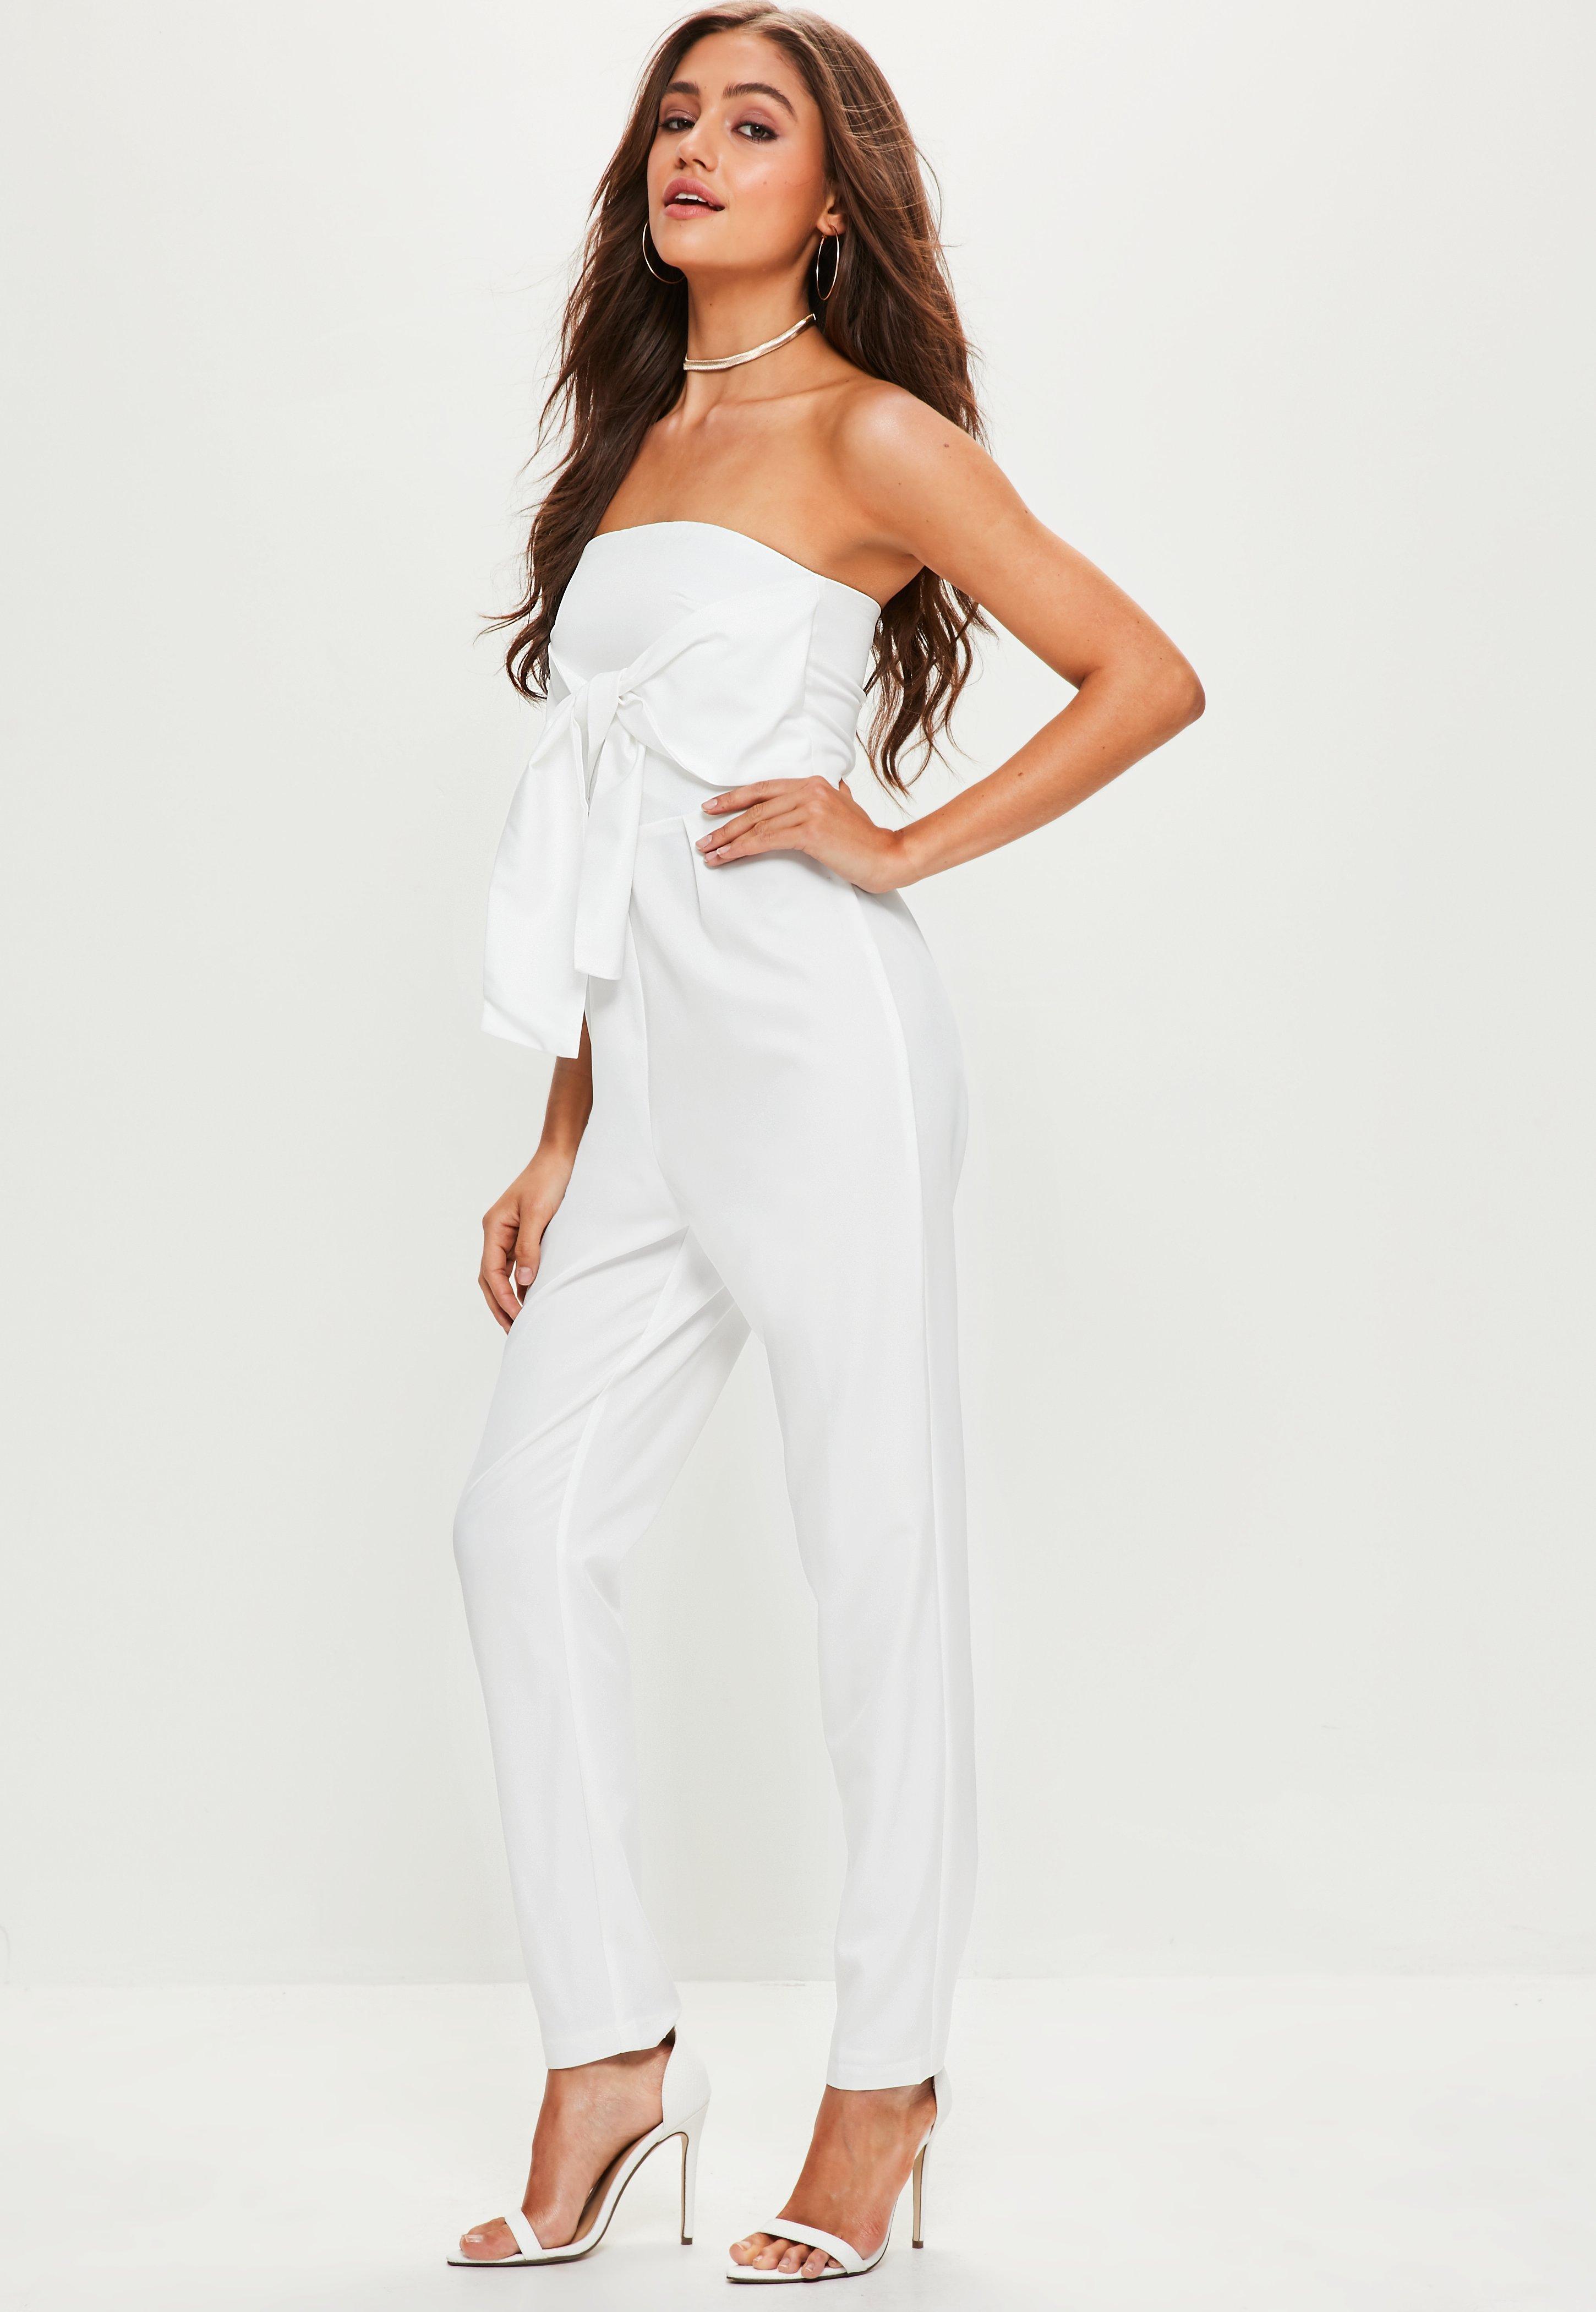 Lyst - Missguided White Tie Front Bandeau Jumpsuit in White